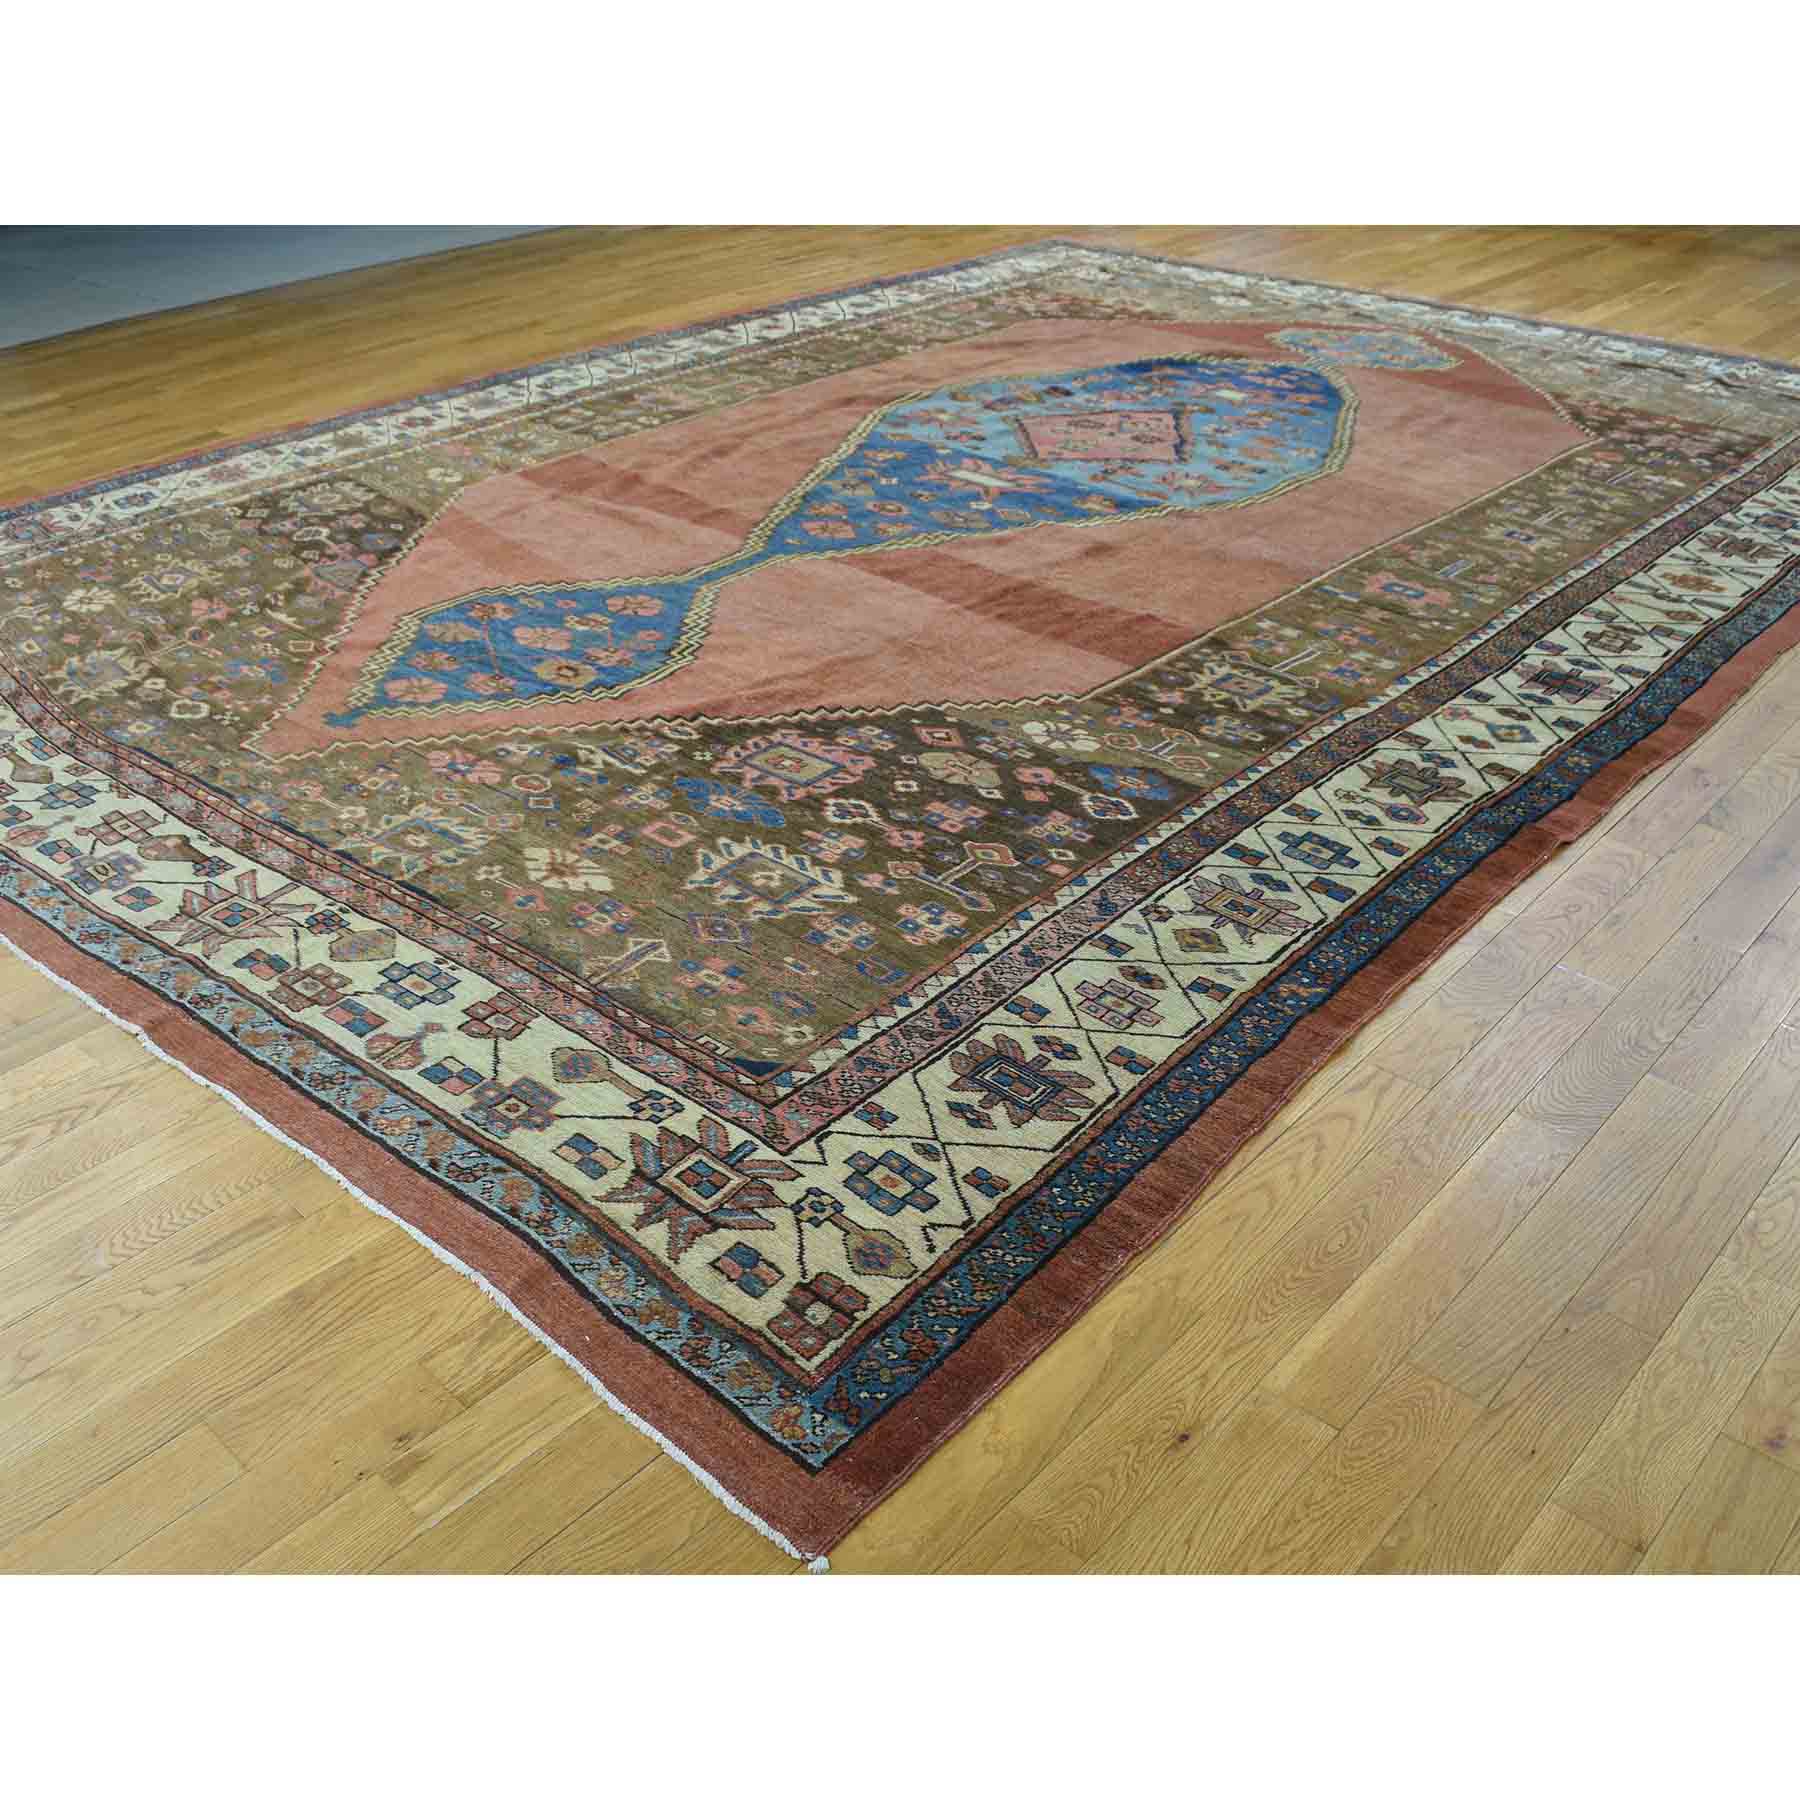 Antique-Hand-Knotted-Rug-170655